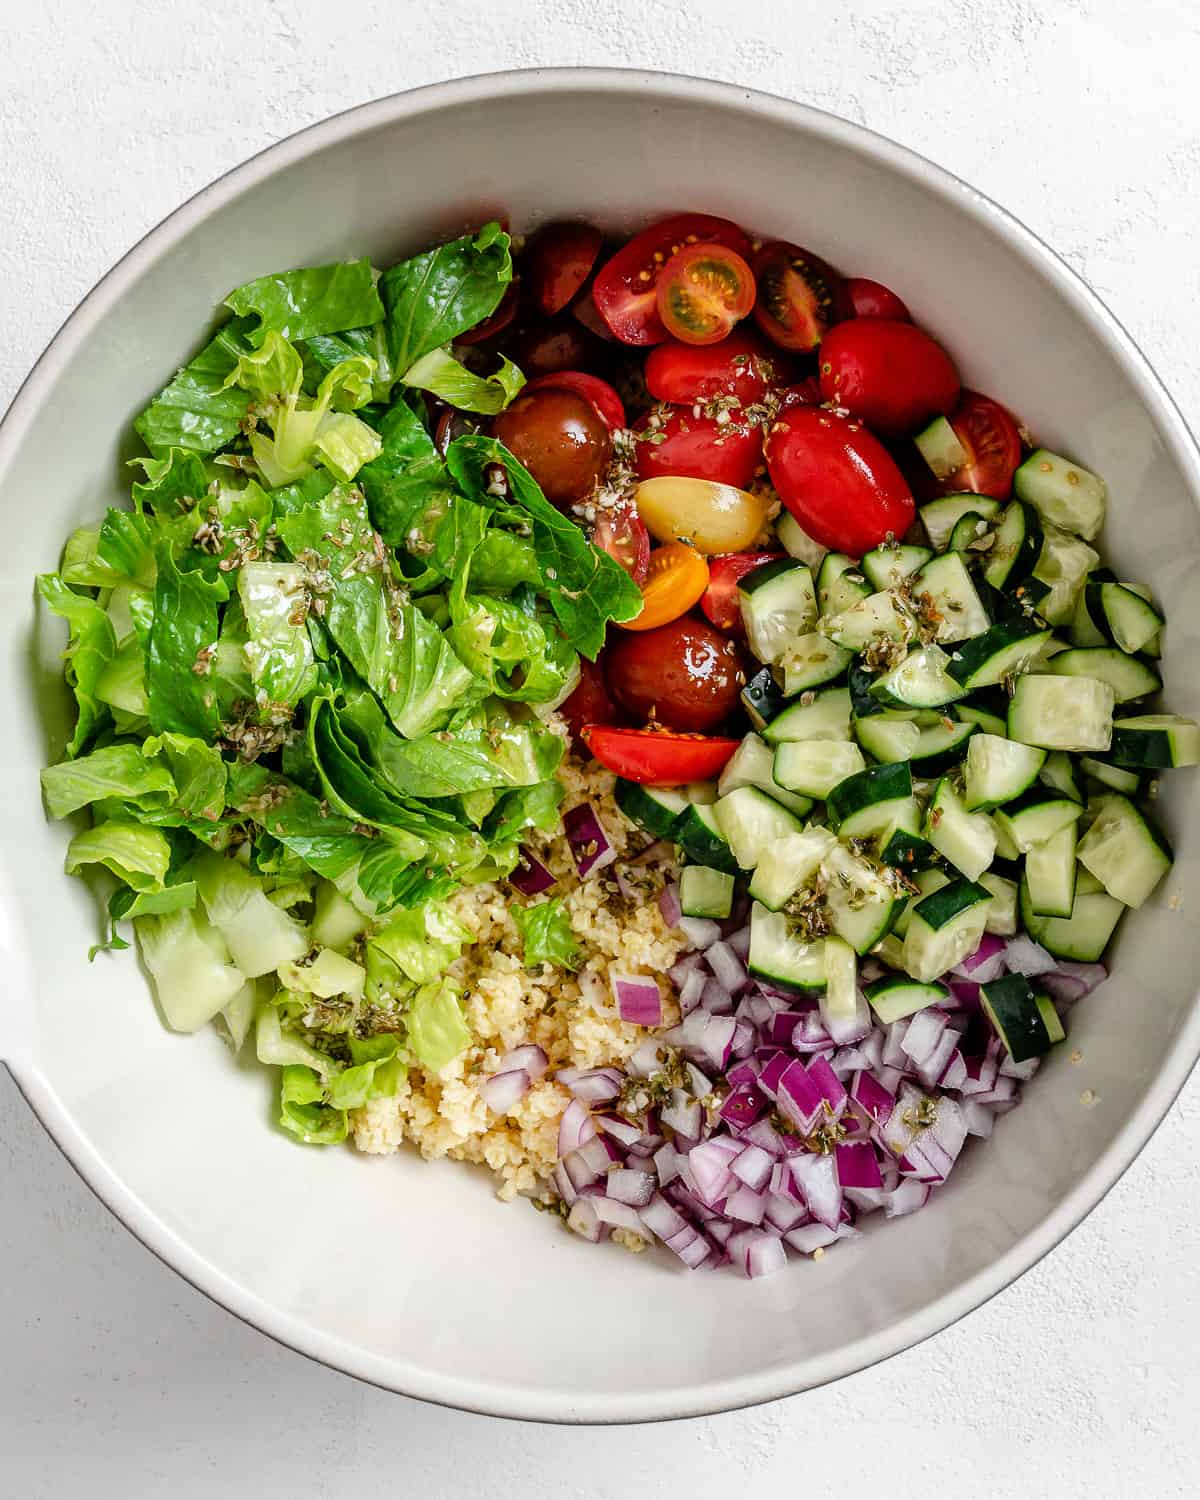 process of adding ingredients for Vegan Greek Millet Salad in a white bowl against a white background